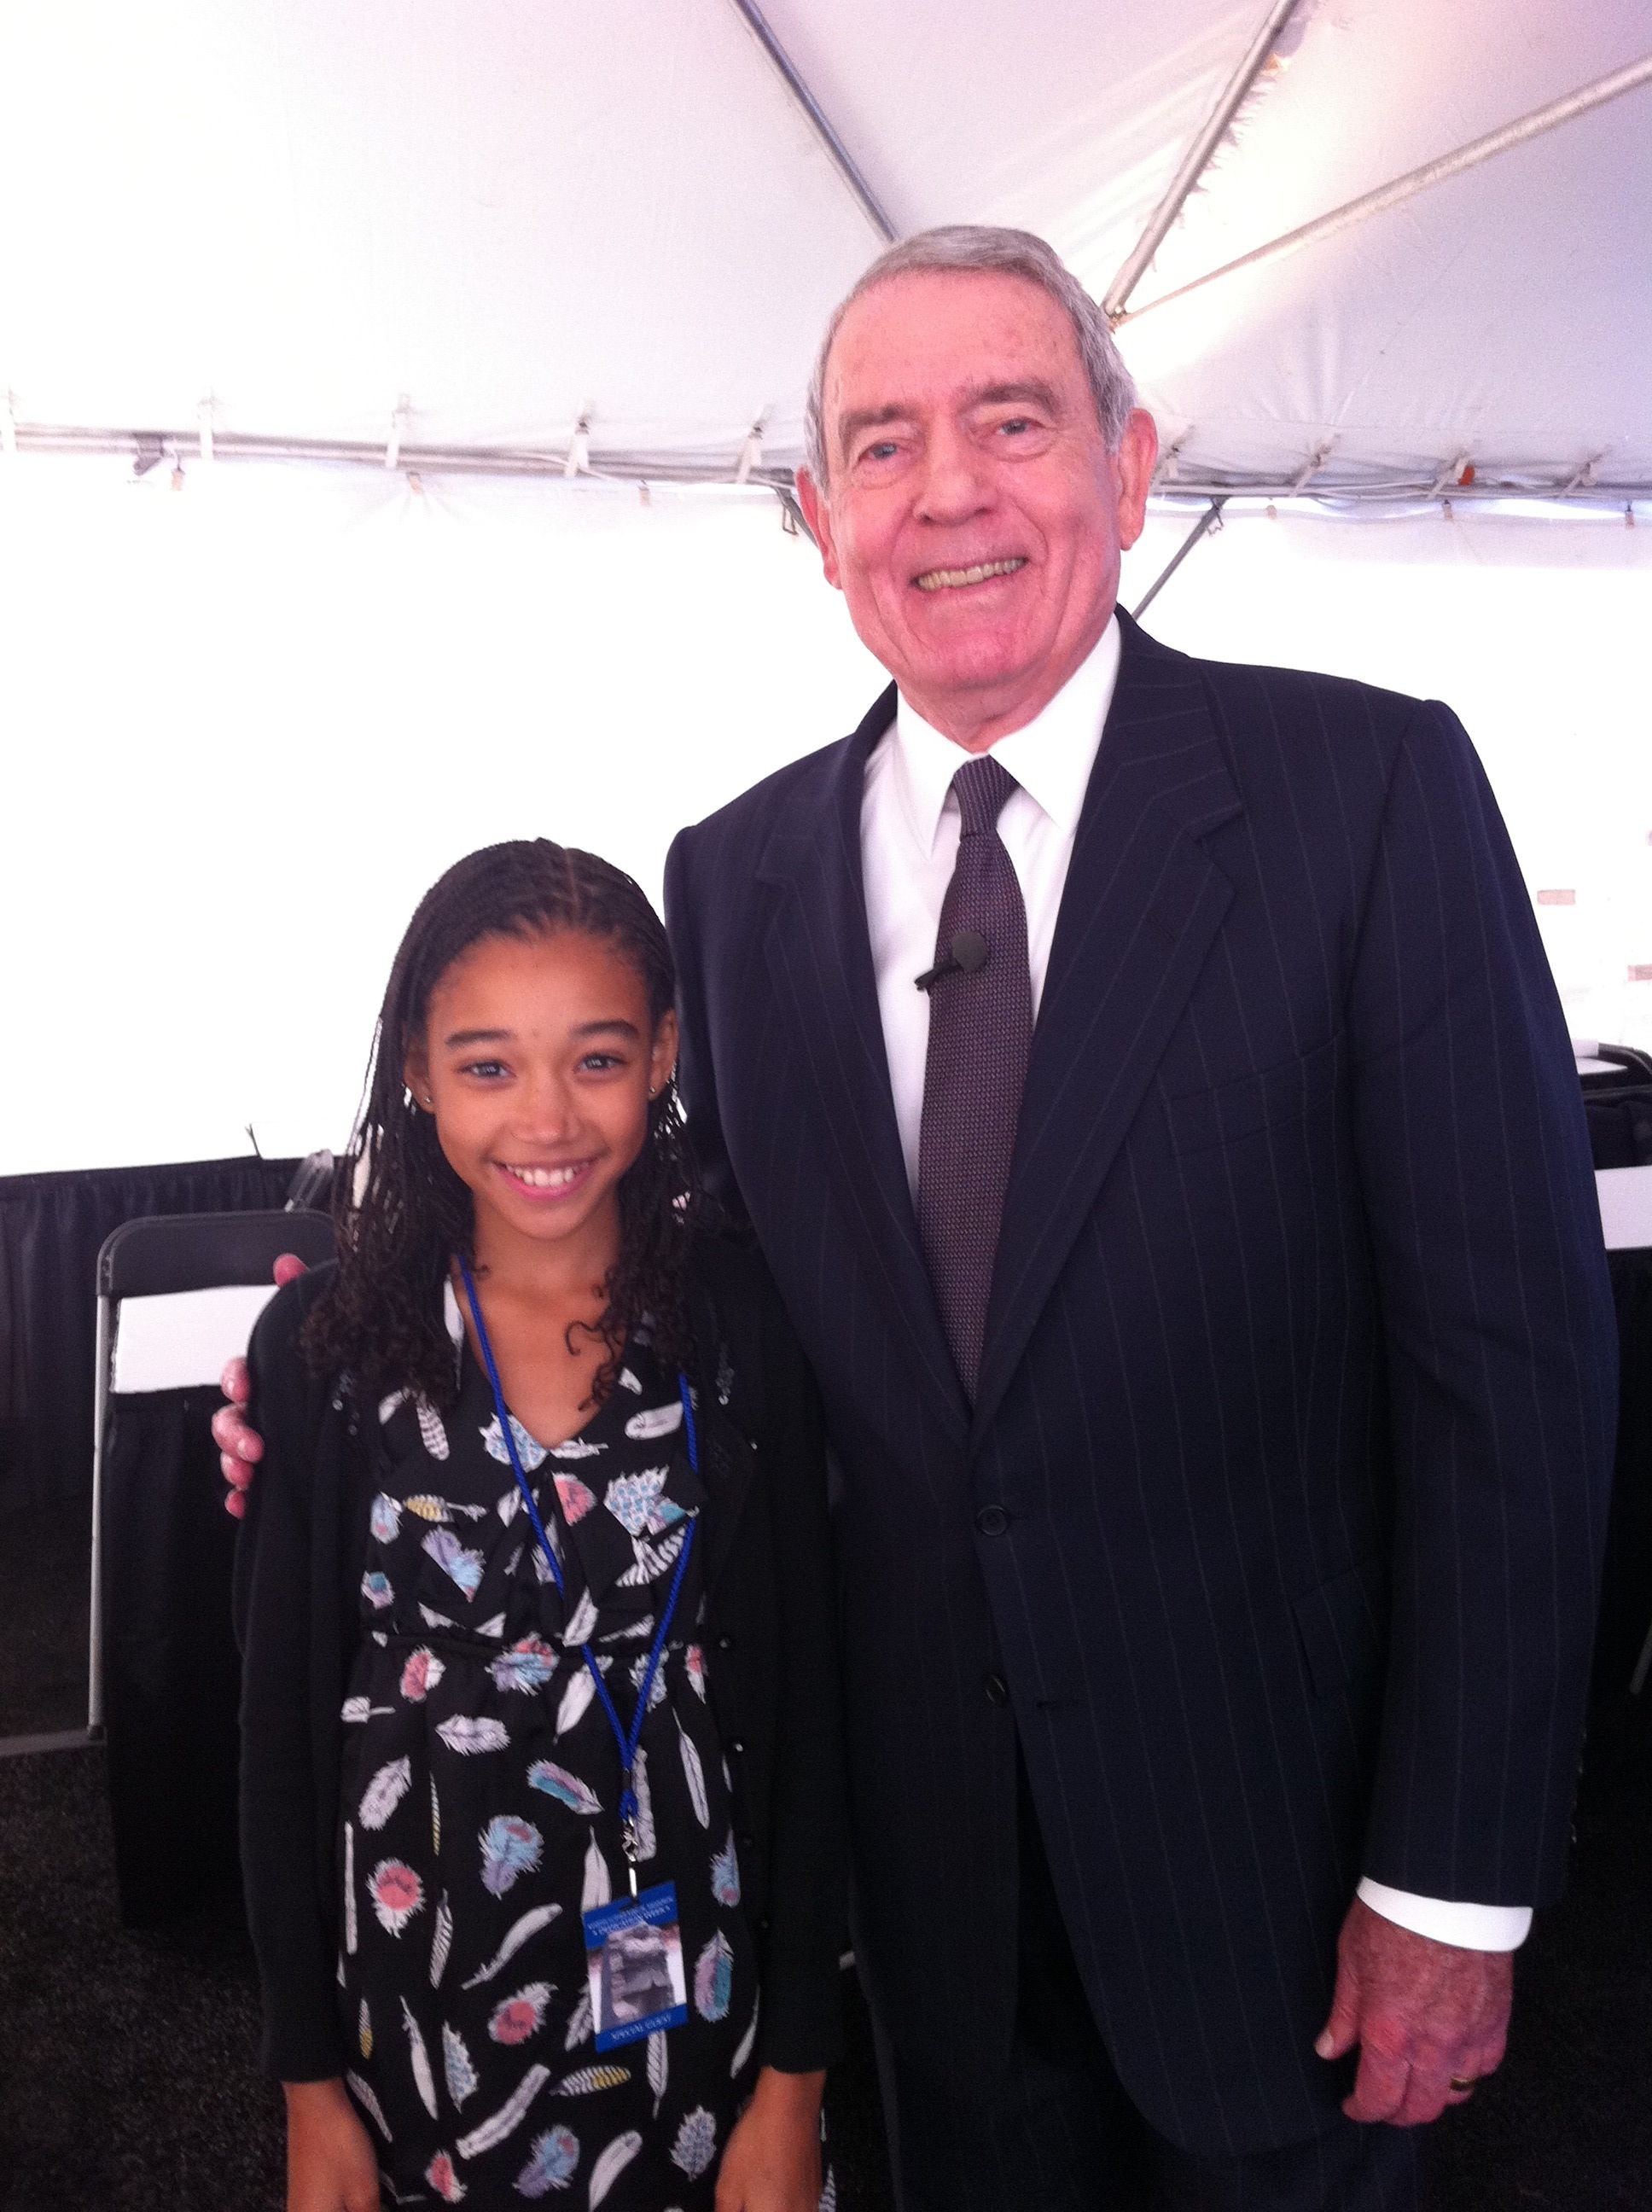 Amandla Stenberg and Dan Rather in the Green Room at the Martin Luther King, Jr. Memorial Dedication - October 16, 2011